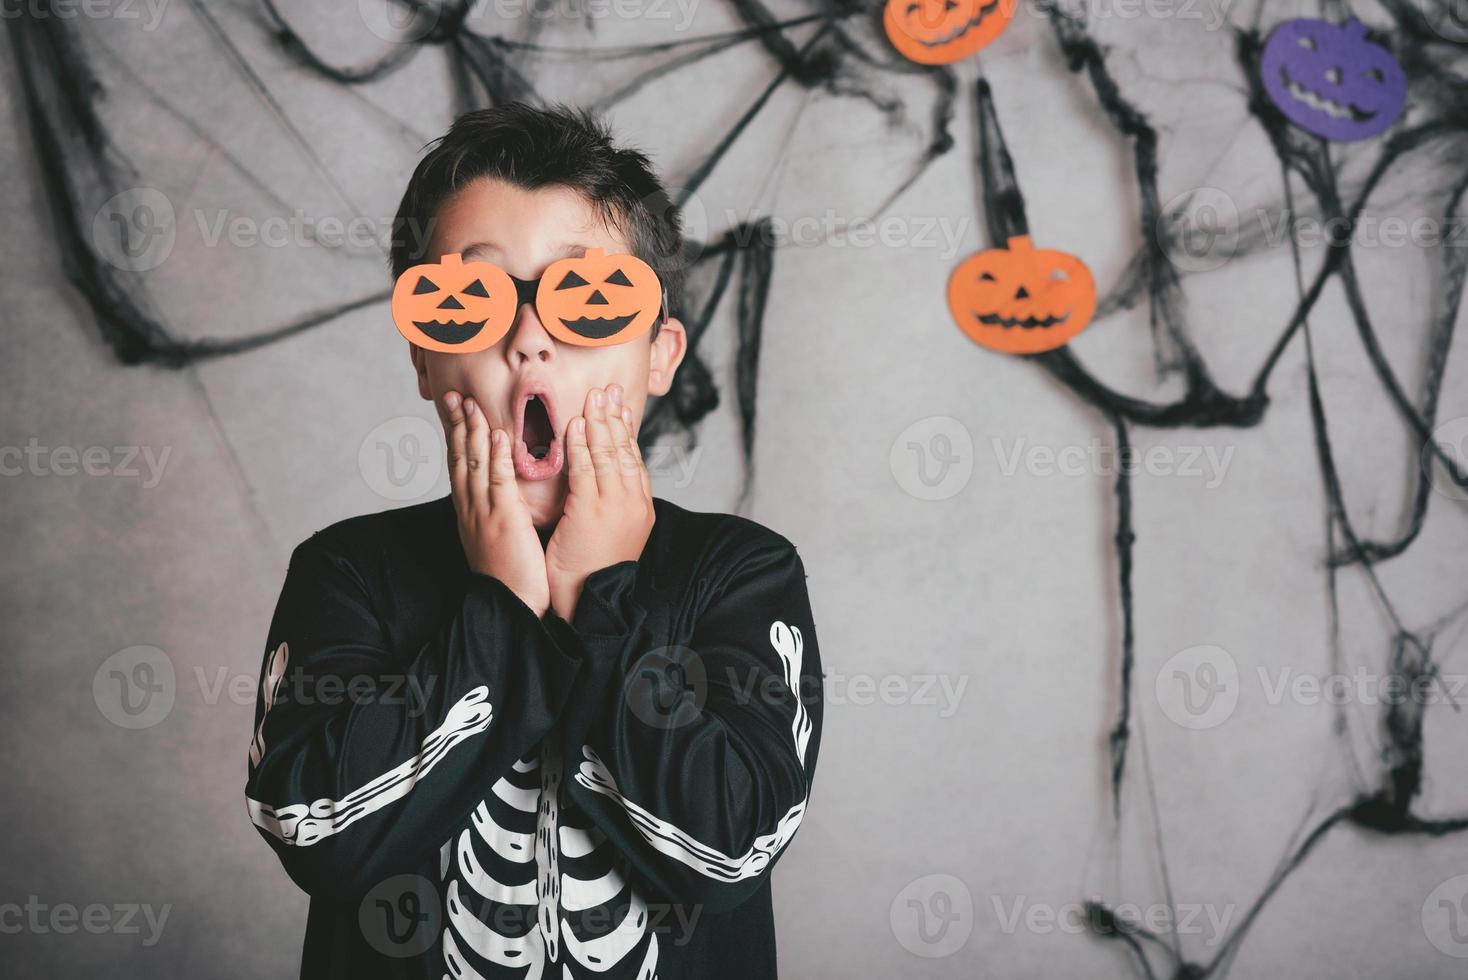 Funny boy at halloween party photo